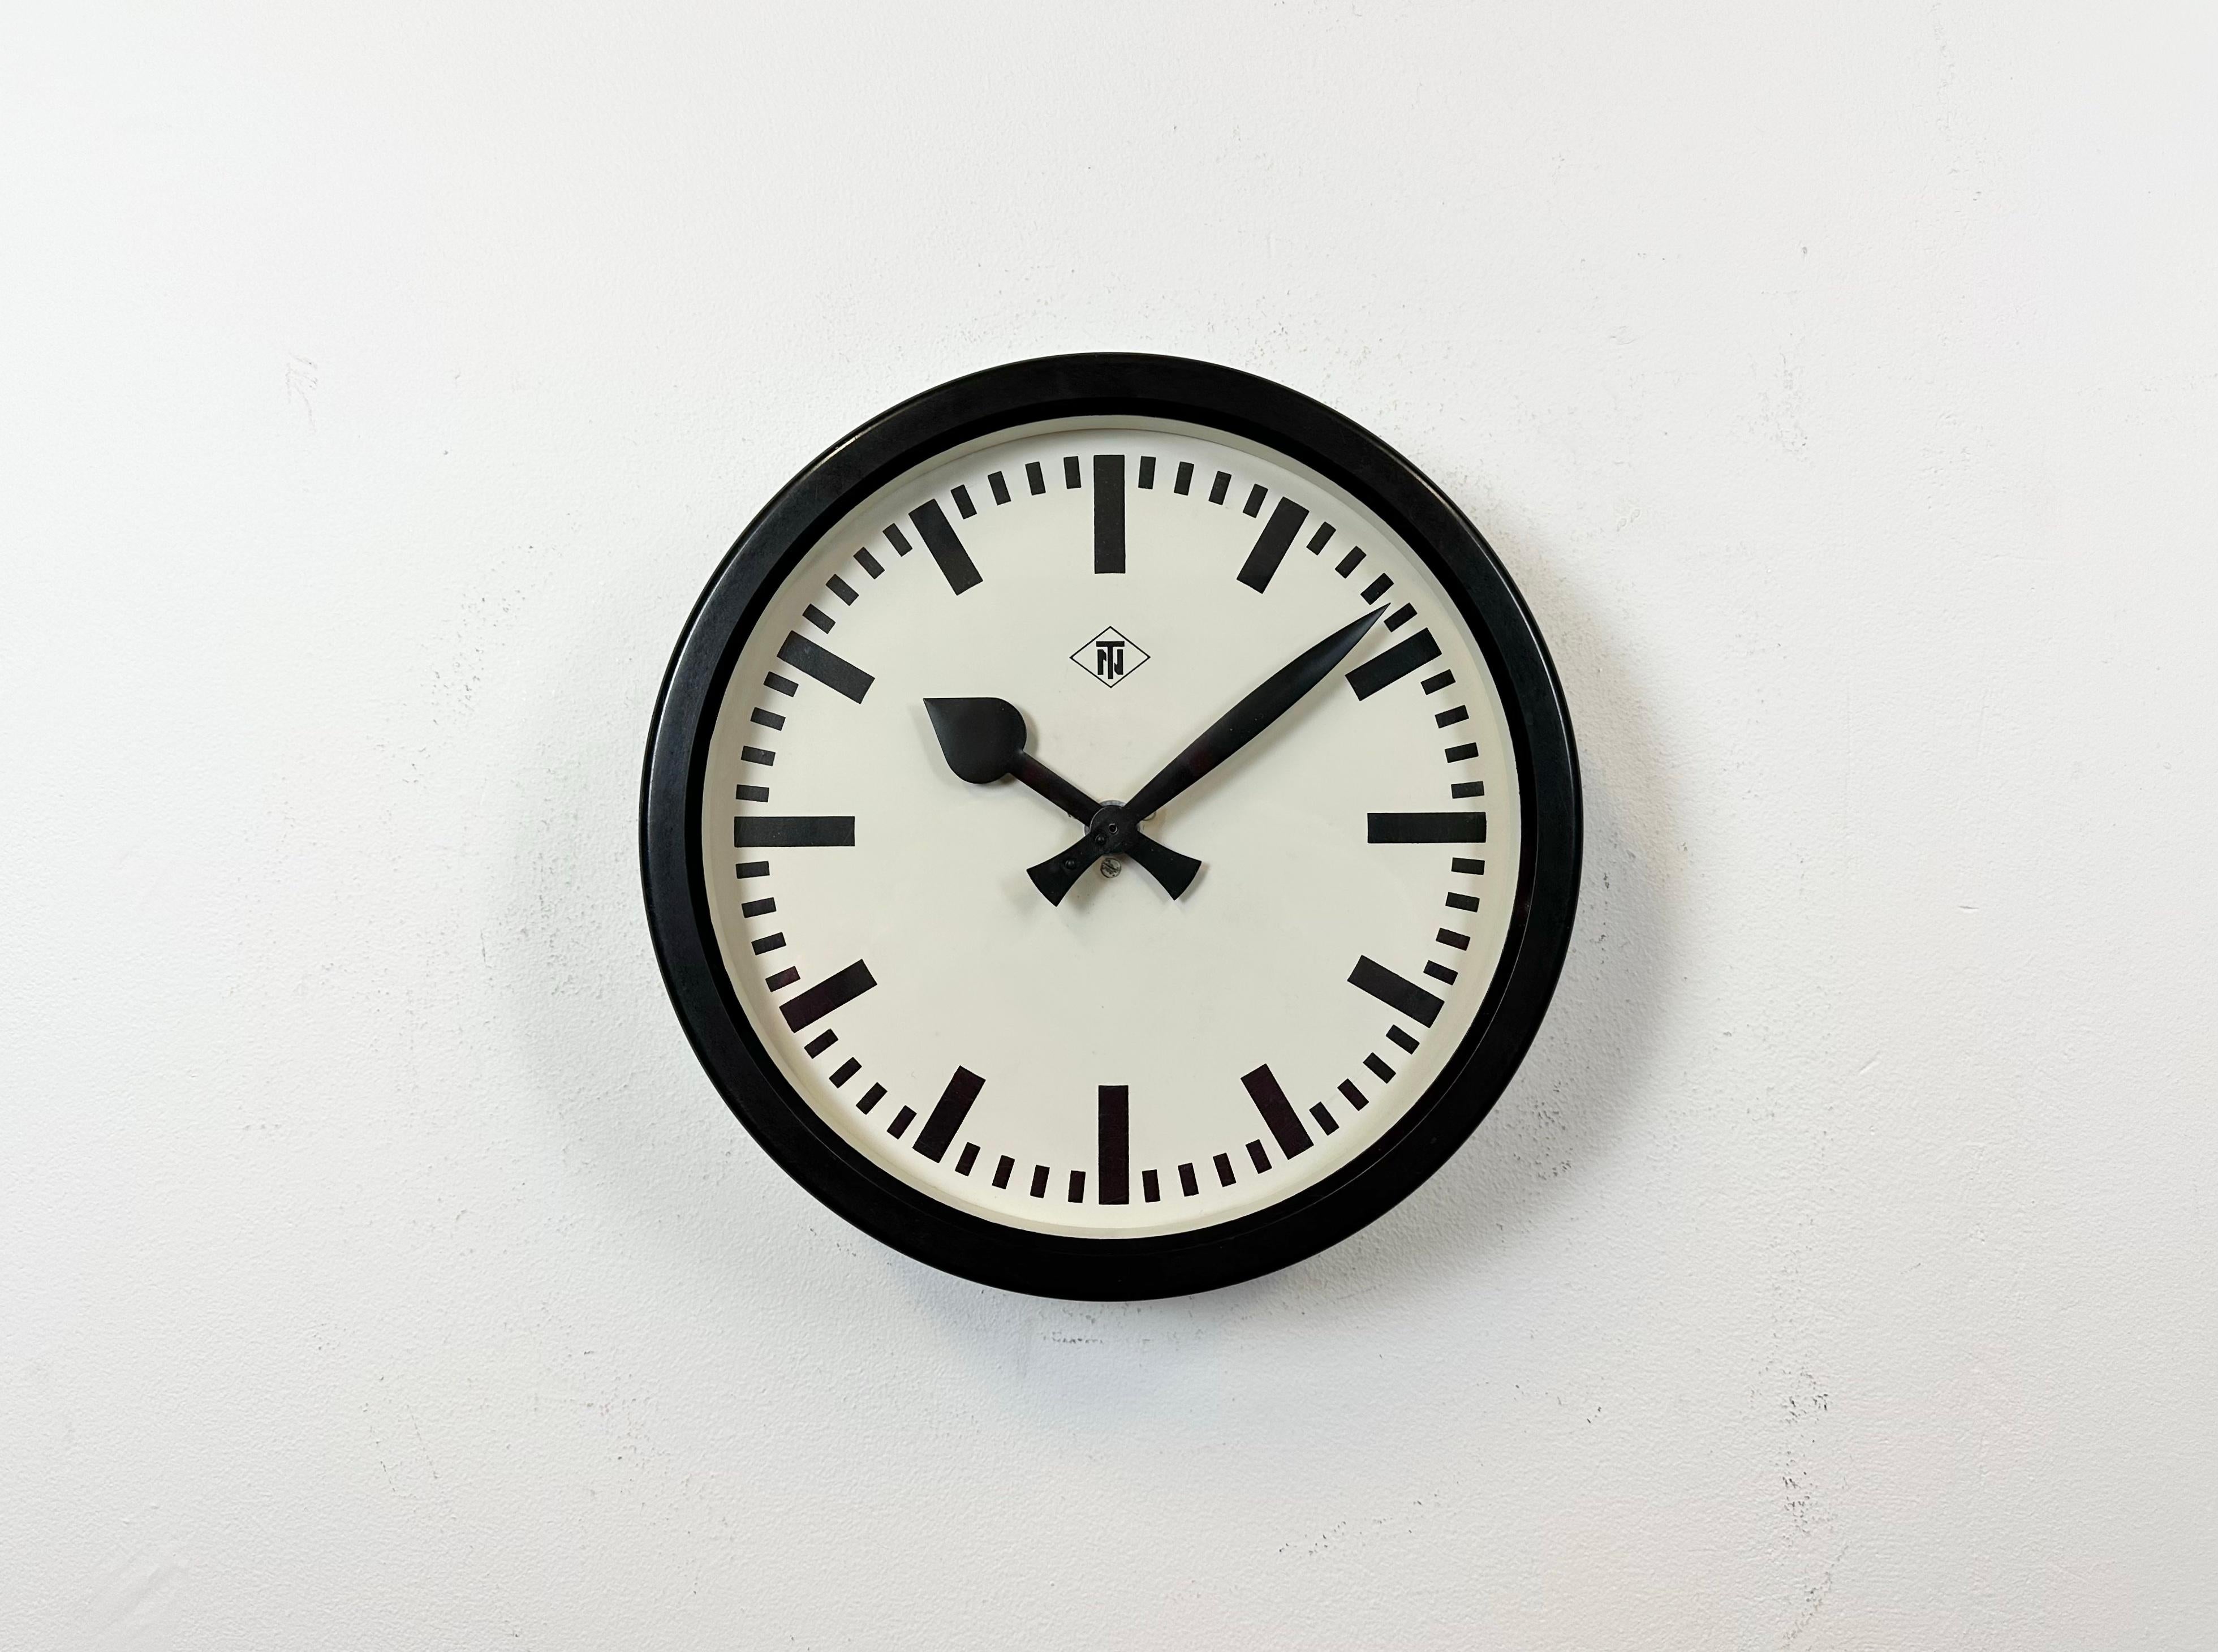 This wall clock was produced by TN Telefonbau und Normalzeit in Germany during the 1940s. It features a black bakelitel frame, a metal dial and a clear glass cover. The piece has been converted into a battery-powered clockwork and requires only one